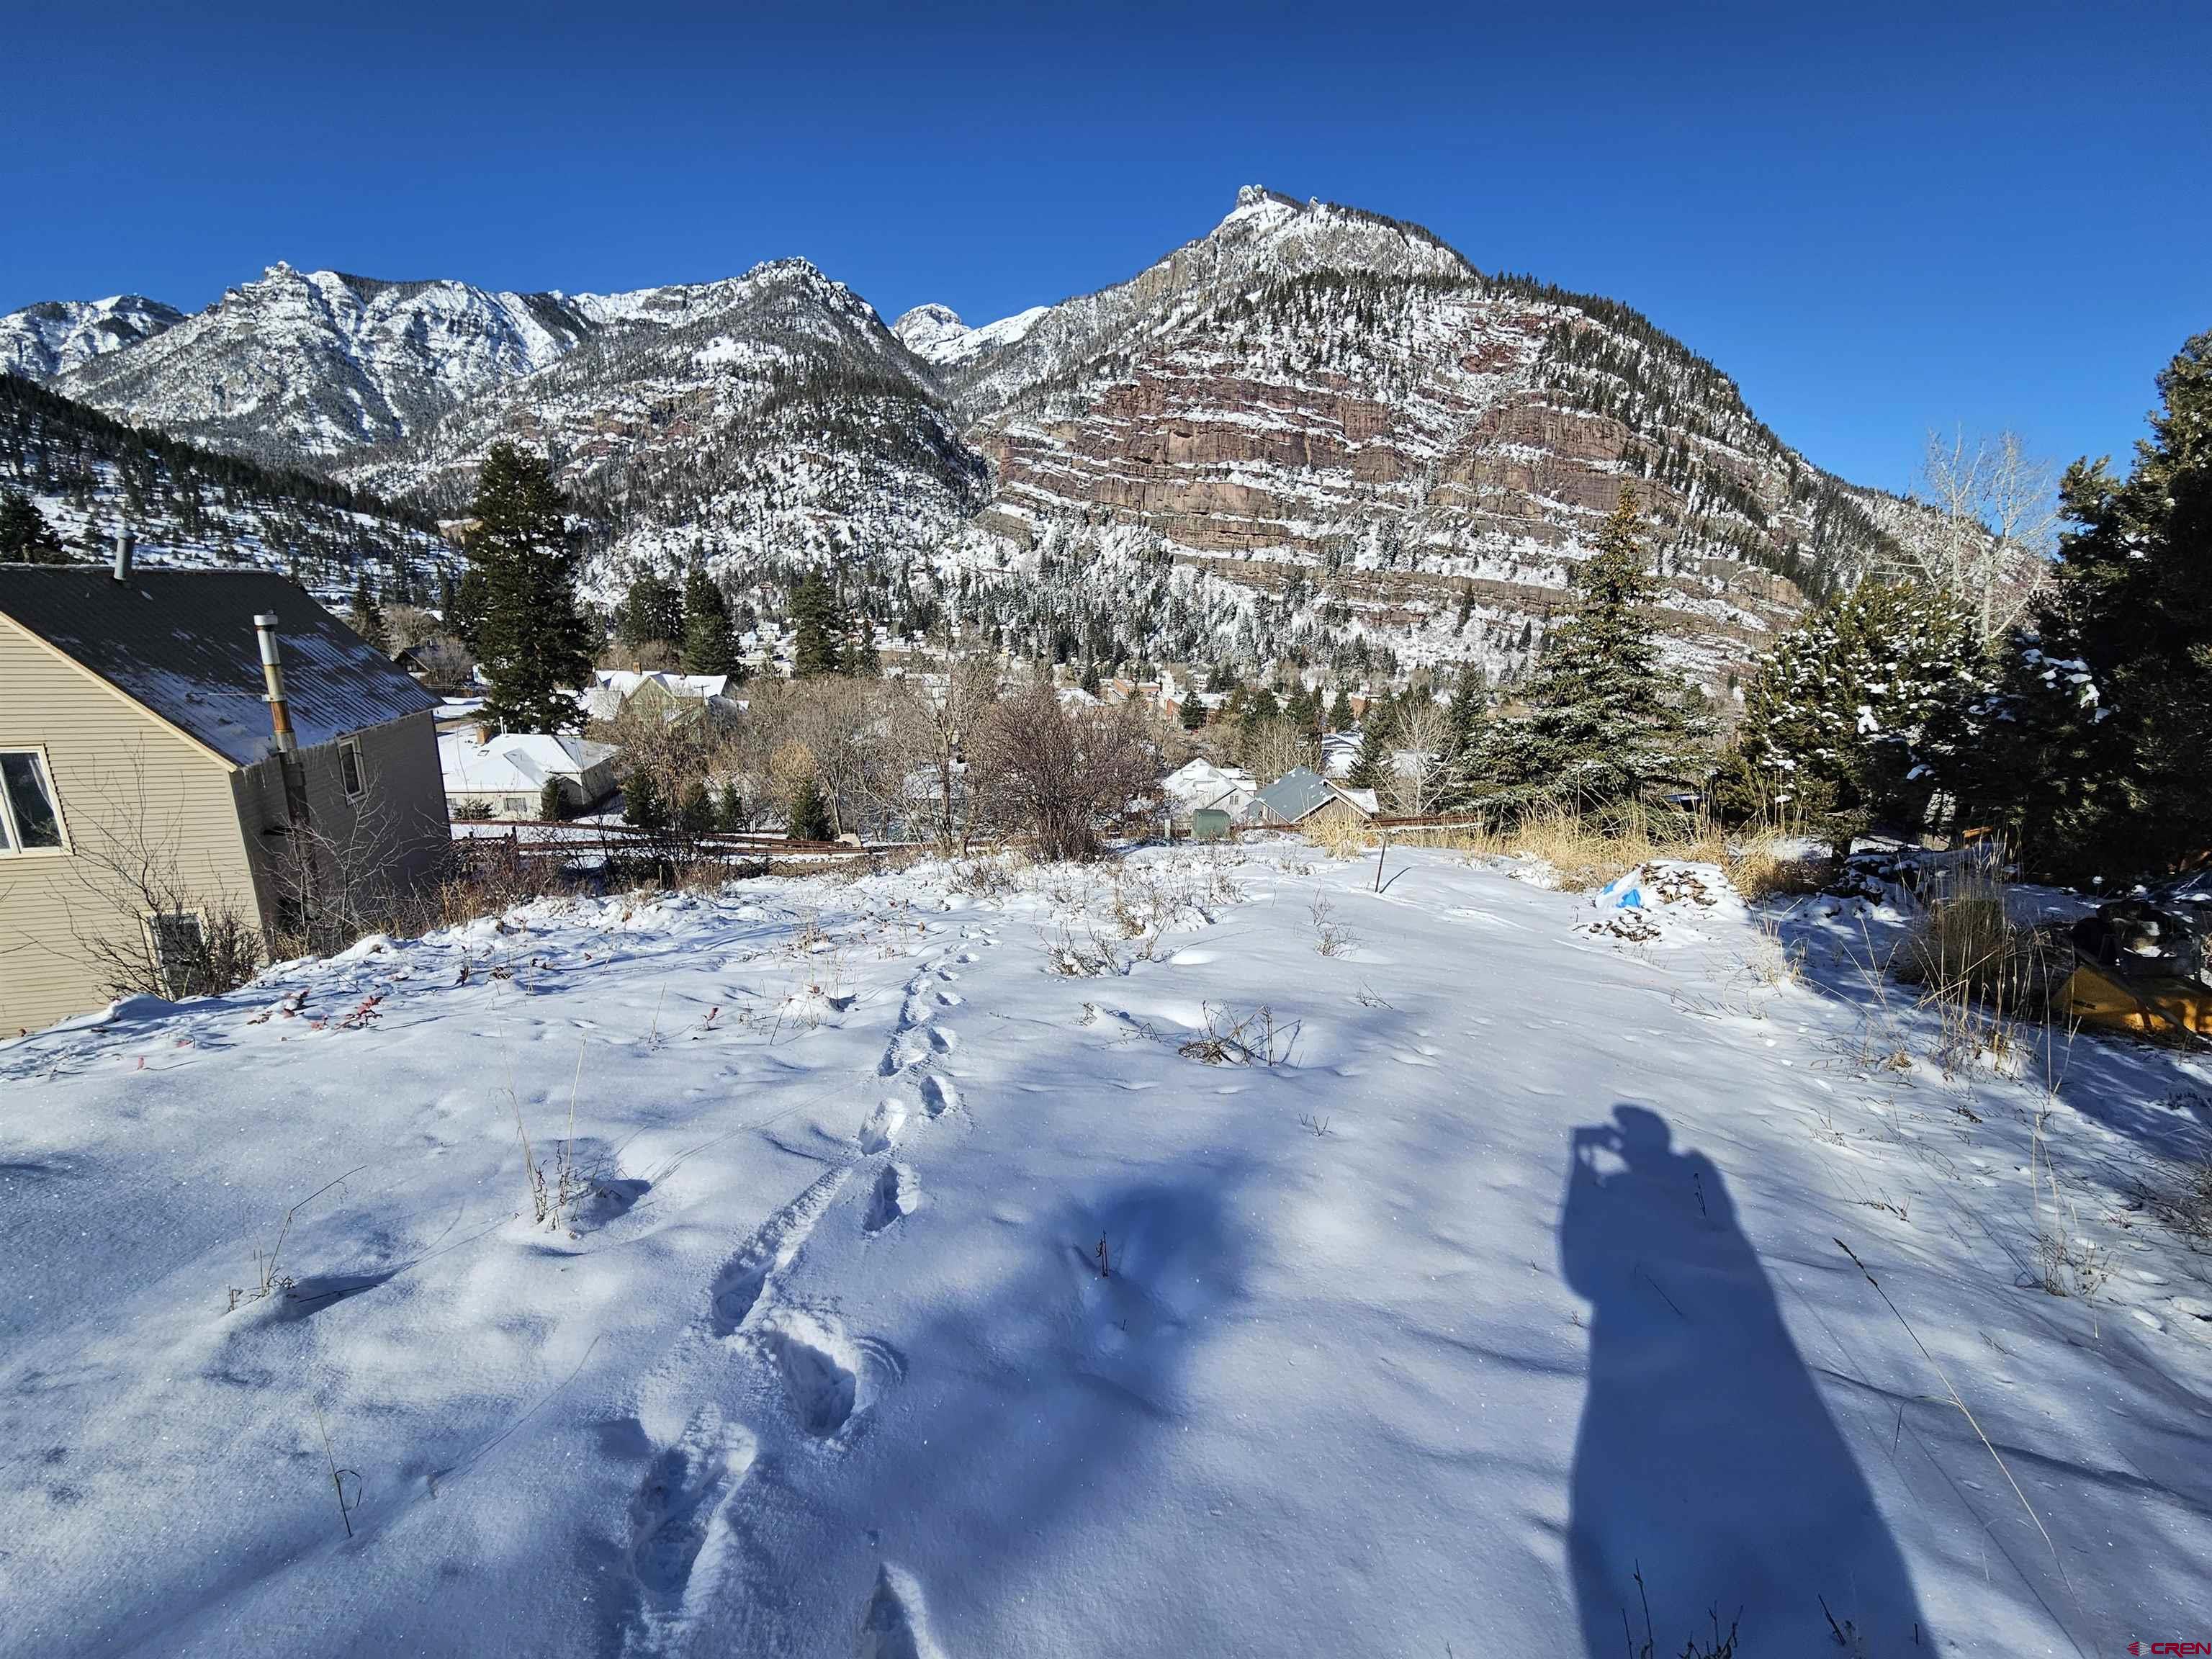 What a fantastic building lot on the upper east side of Ouray.  There is no chance of flood, avalanche or rockfall from this elevated location.  Dubbed the sunny side of Ouray, this lot is zoned R-1 which is a 30 day or more rental zone.  A true plus for this zone is your neighbors don't change every few days like the R-2 zone which allows short term rentals.  The elevation creates better views and less noise from the busy main street of Ouray.  This lot is 50' wide by 142' deep.  Electricity is 6 inches off the property line and water and sewer are in 6th Street.  This lot is on a dead end street so you don't have much traffic.  The house above it just sold for $2.4M.  This is a very attractive neighborhood.  All four corners are marked.  Come see this one and fall in love!